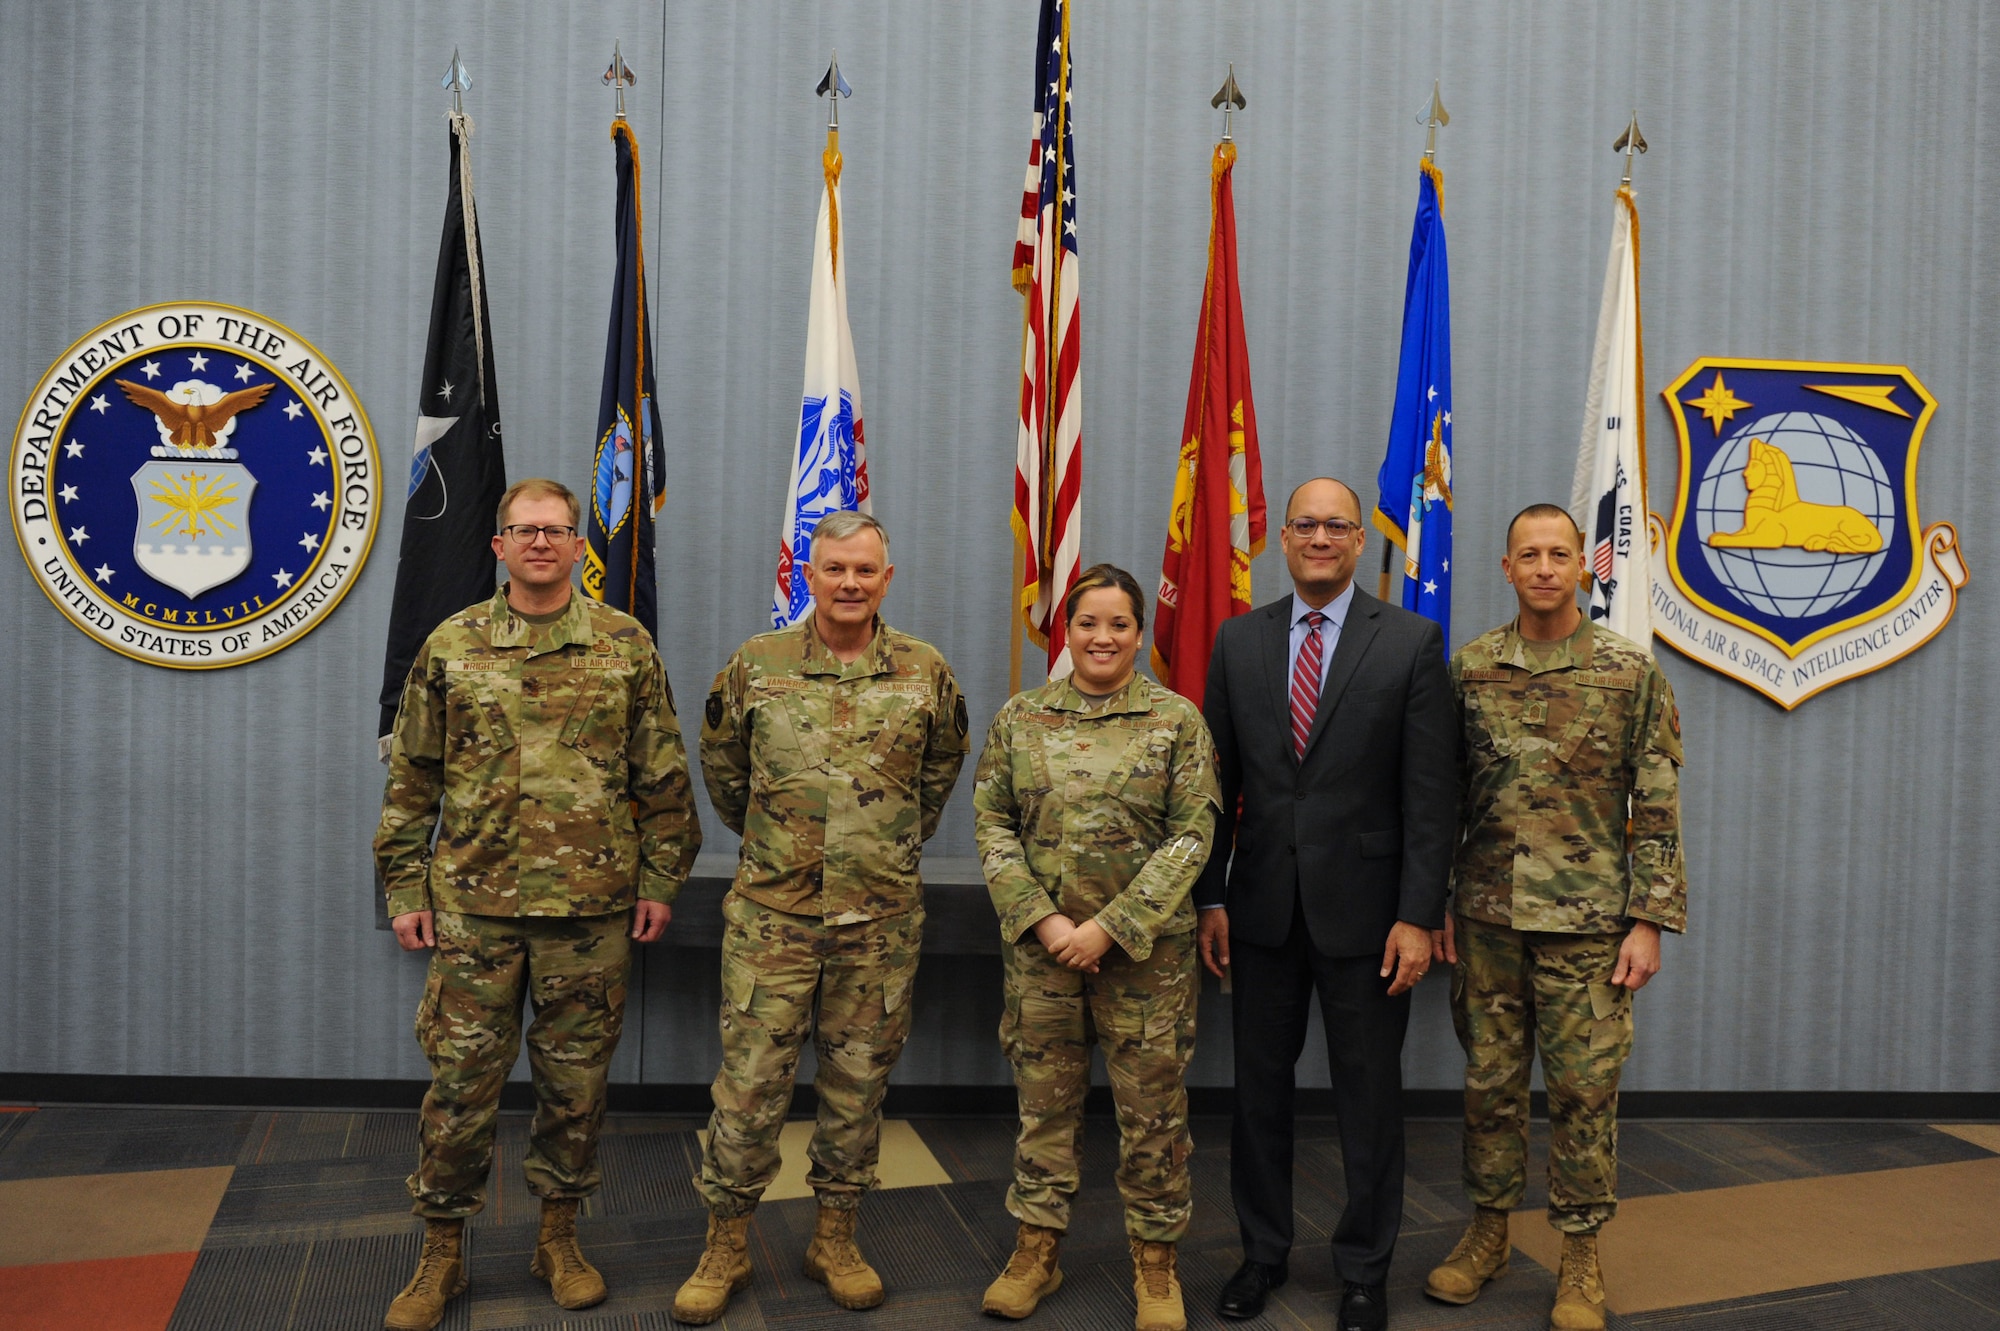 Gen. Glen VanHerck (middle-left), Commander, North American Aerospace Defense Command and U.S. Northern Command, and Maj. Gen. Parker H. Wright, Intelligence and Information director, North American Aerospace Defense Command and United States Northern Command, pose for a photo with National Air and Space Intelligence Center leadership during a visit to Wright-Patterson Air Force Base, Ohio, Jan. 11, 2023. Col. Ariel Batungbacal, NASIC commander, Duane Harrison , NASIC chief scientist, and Chief Master Sgt. Carlos Labrador, NASIC command chief led the visit which highlighted the Intelligence Production Center III, the foreign materiel exploitation  labs, and the Airmen and Guardians who comprise these organizations.